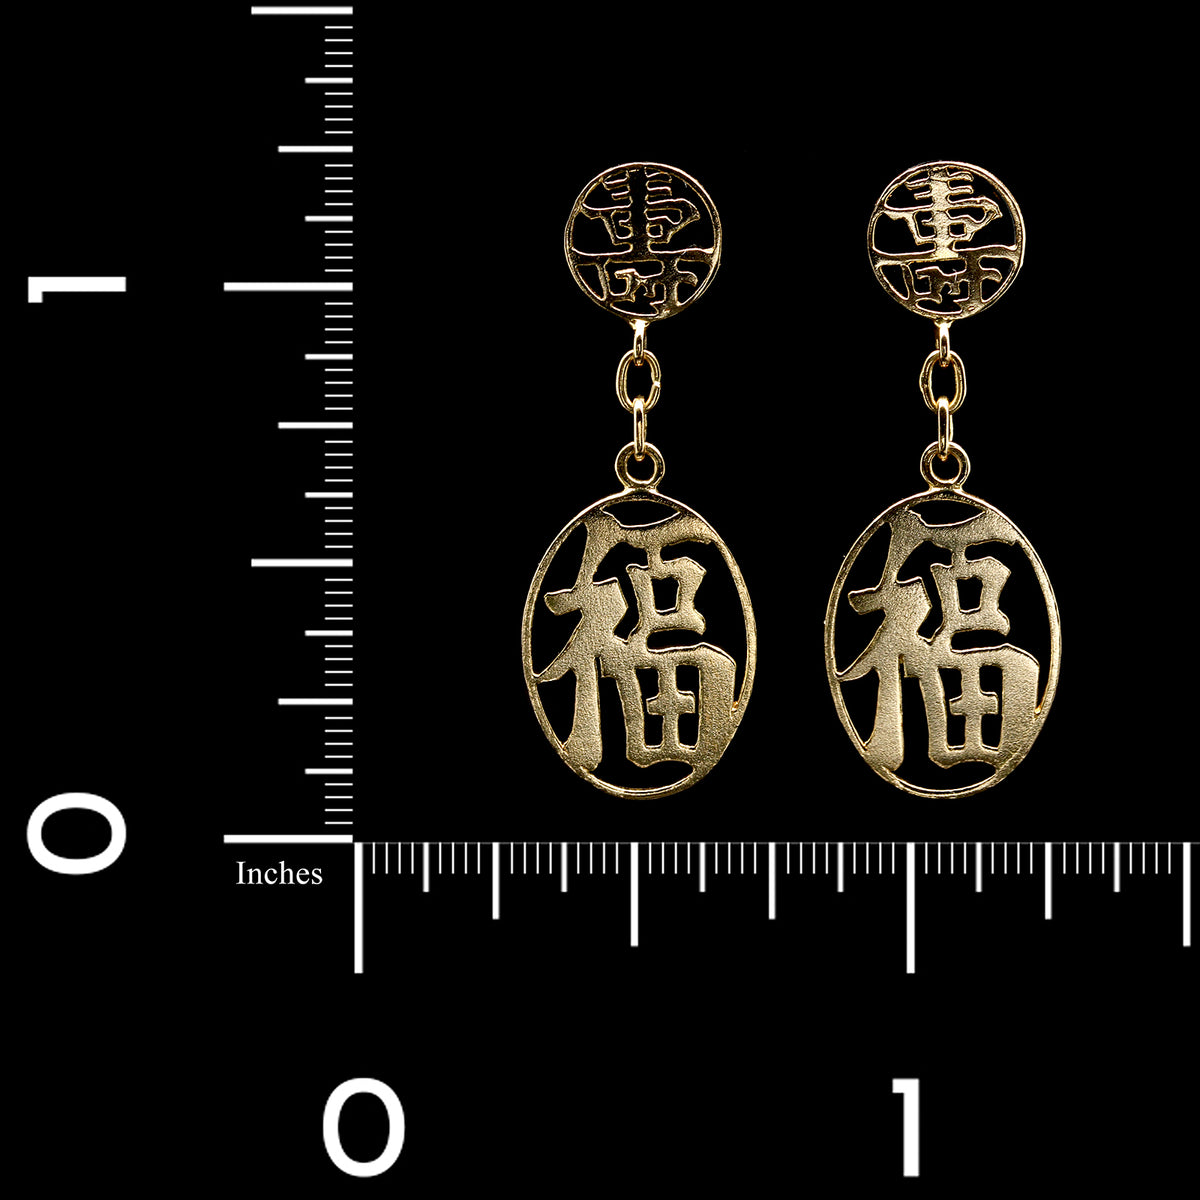 14K Yellow Gold Estate Chinese Character Drop Earrings